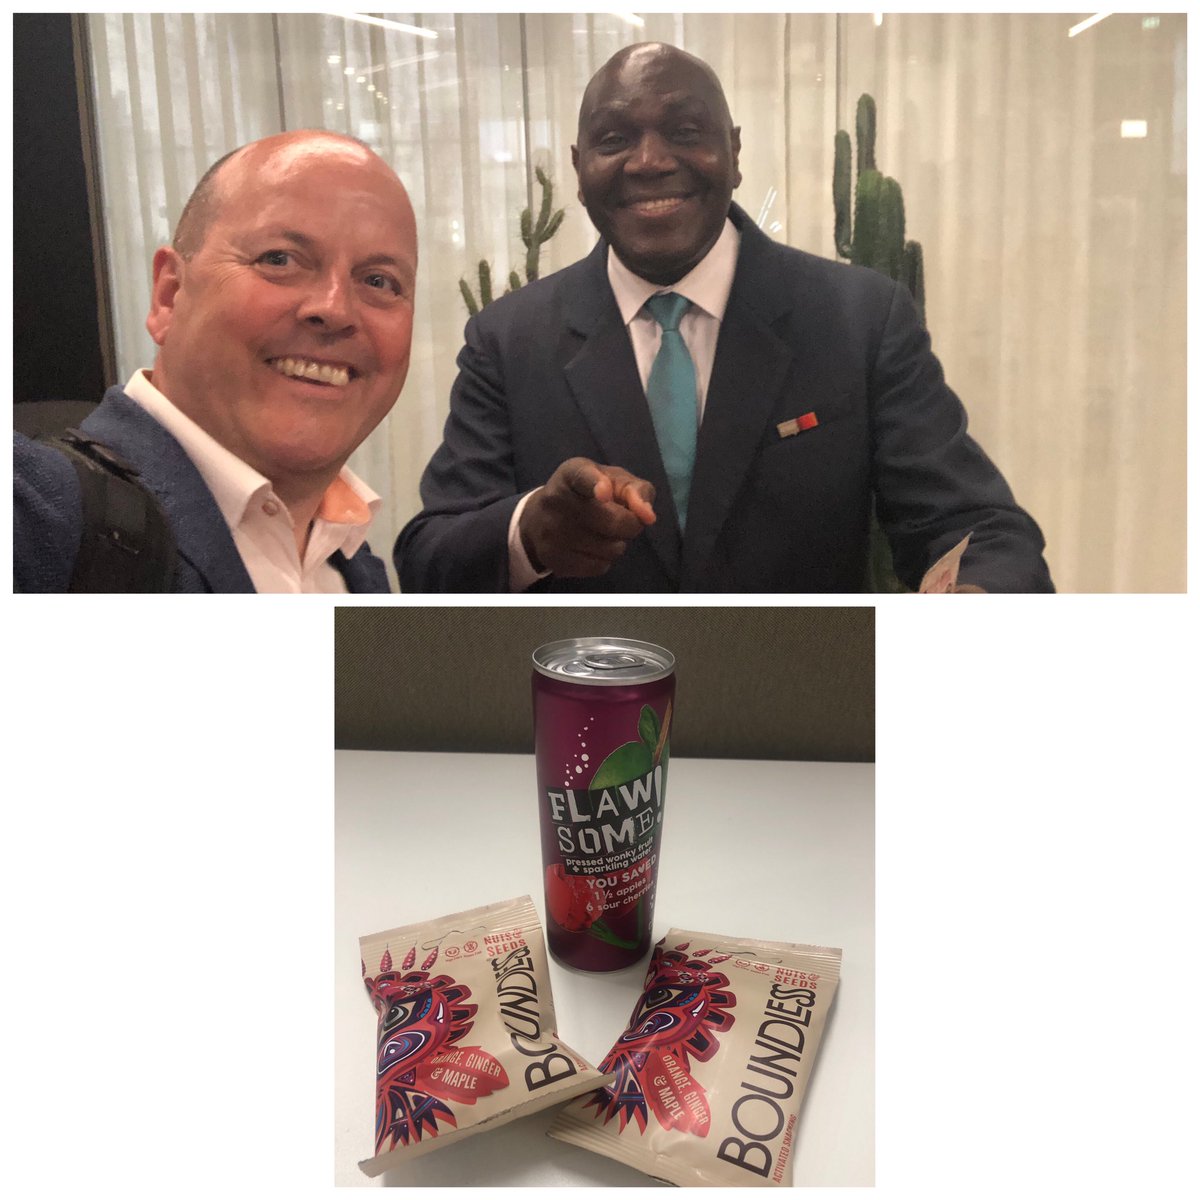 Great welcome this morning @PwC_UK from the legend that is @francispwc1 thanks for the healthy snacks from fruit that would otherwise be landfill @flawsomedrinks @chris110674